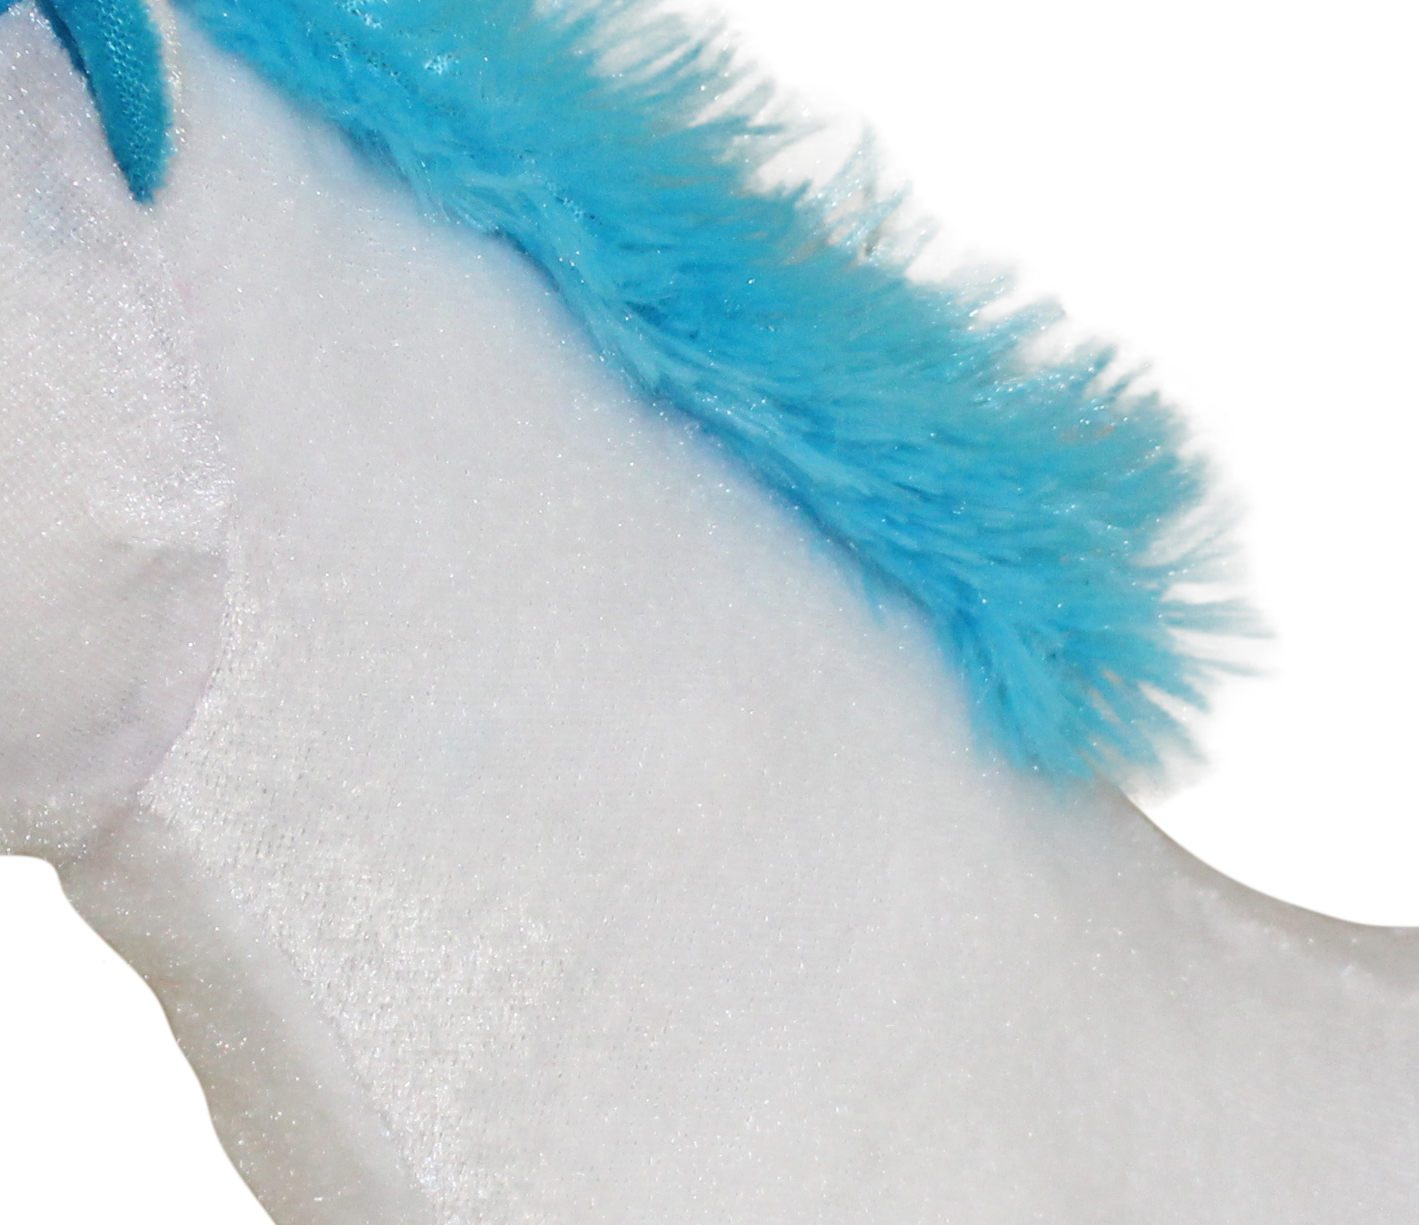 Plush Pal 12" Soft & Fluffy Blue Unicorn Stuffed Animal Toy with Blue Teal Tail And Mane - image 5 of 6